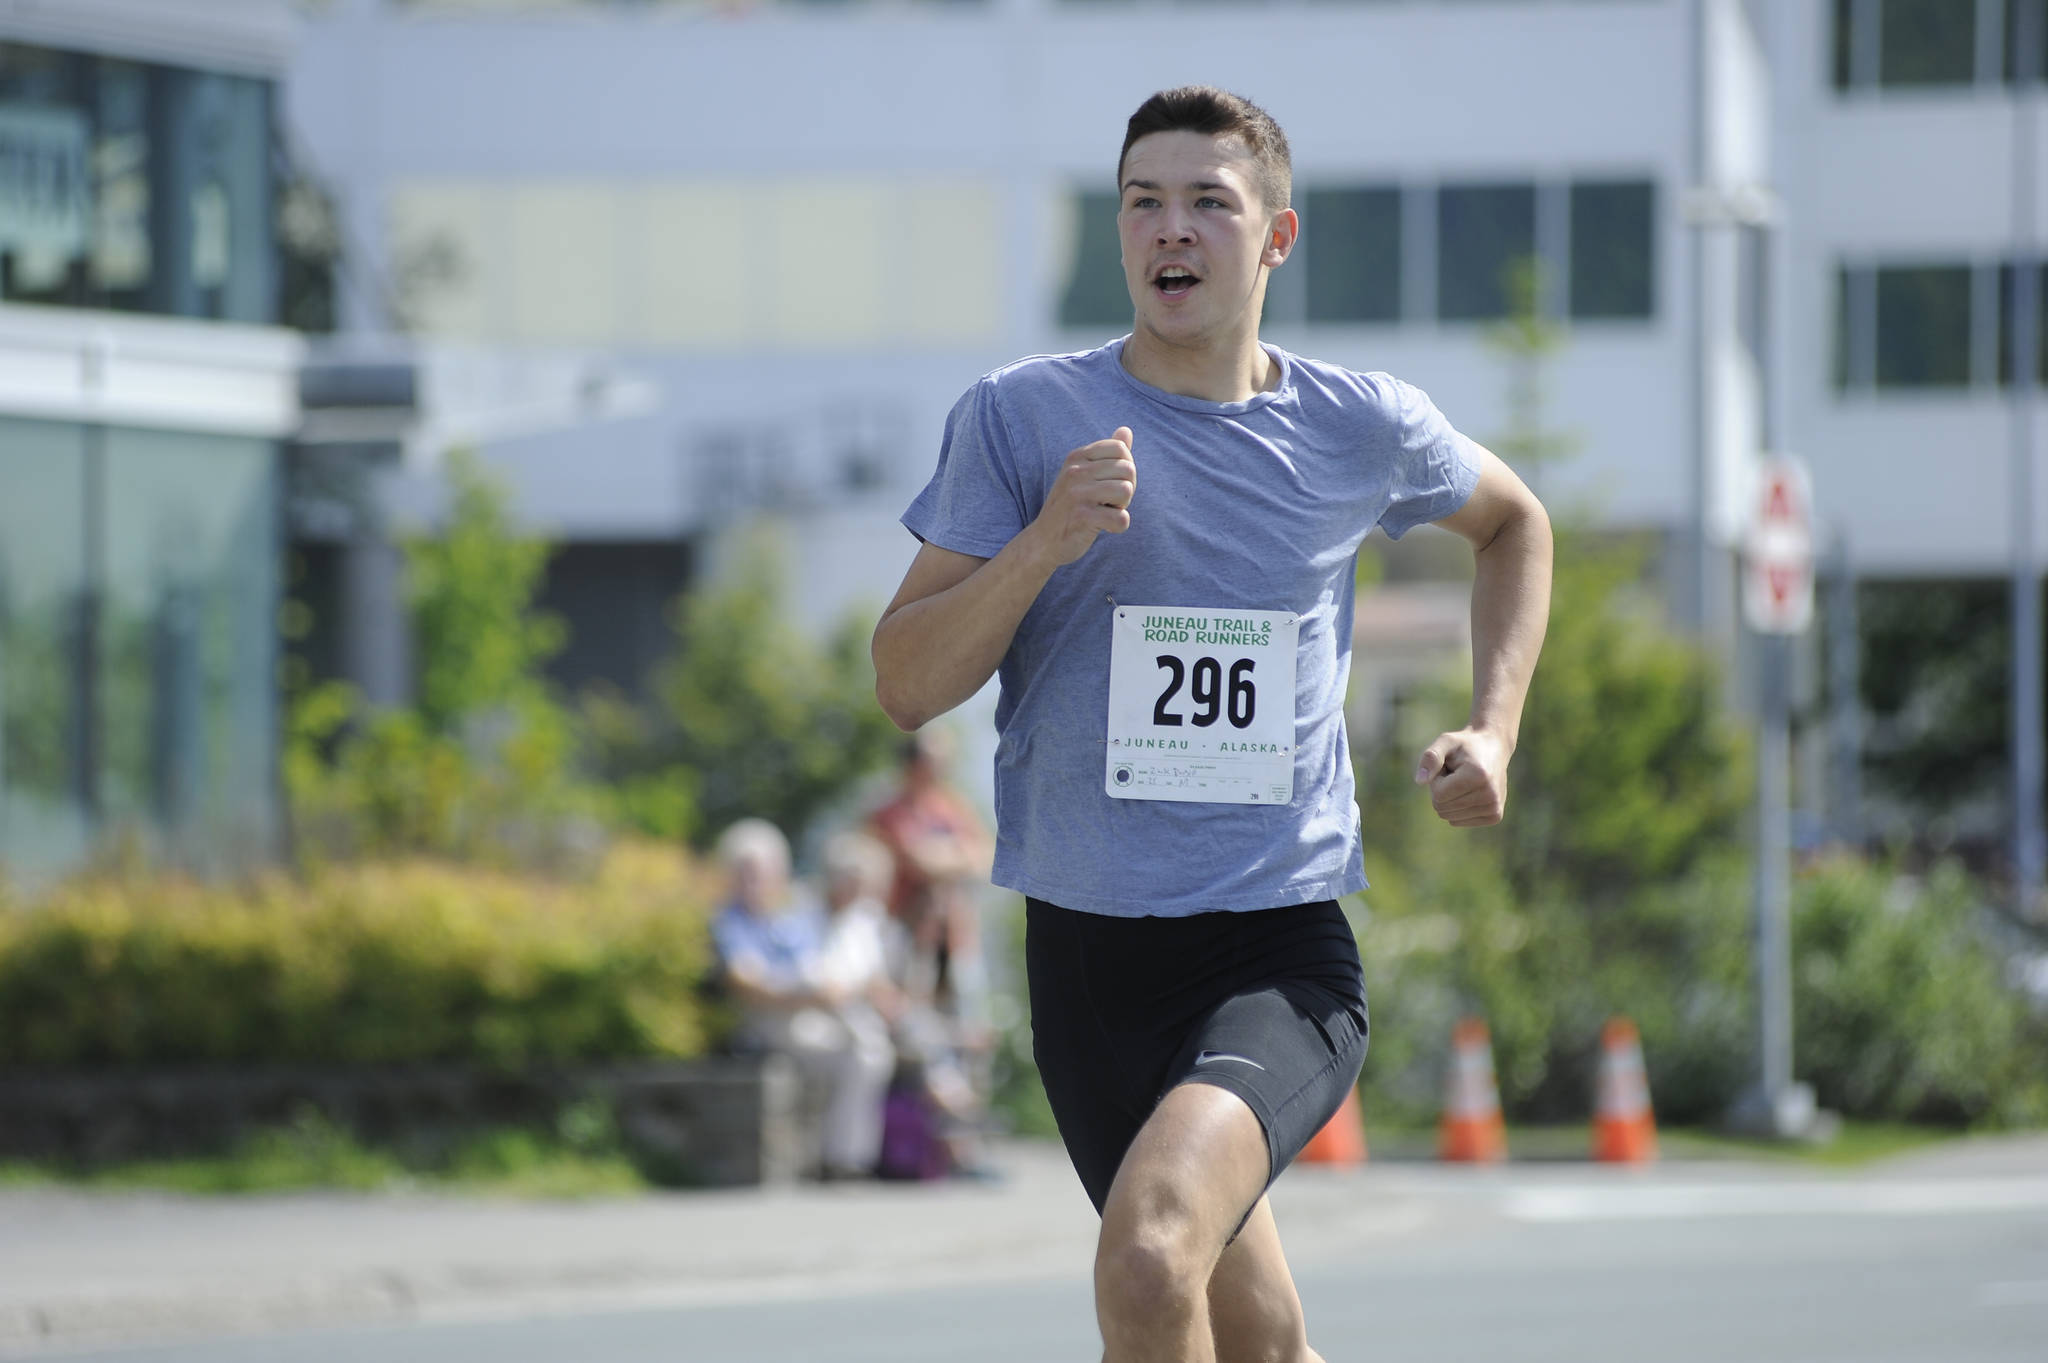 Zach Bursell sprints to the finish line of the Glenn Frick Memorial Mile, which took place just before the start of the Juneau Fourth of July Parade on Wednesday morning. Bursell placed first overall and set a new course record in the mile. (Nolin Ainsworth | Juneau Empire)